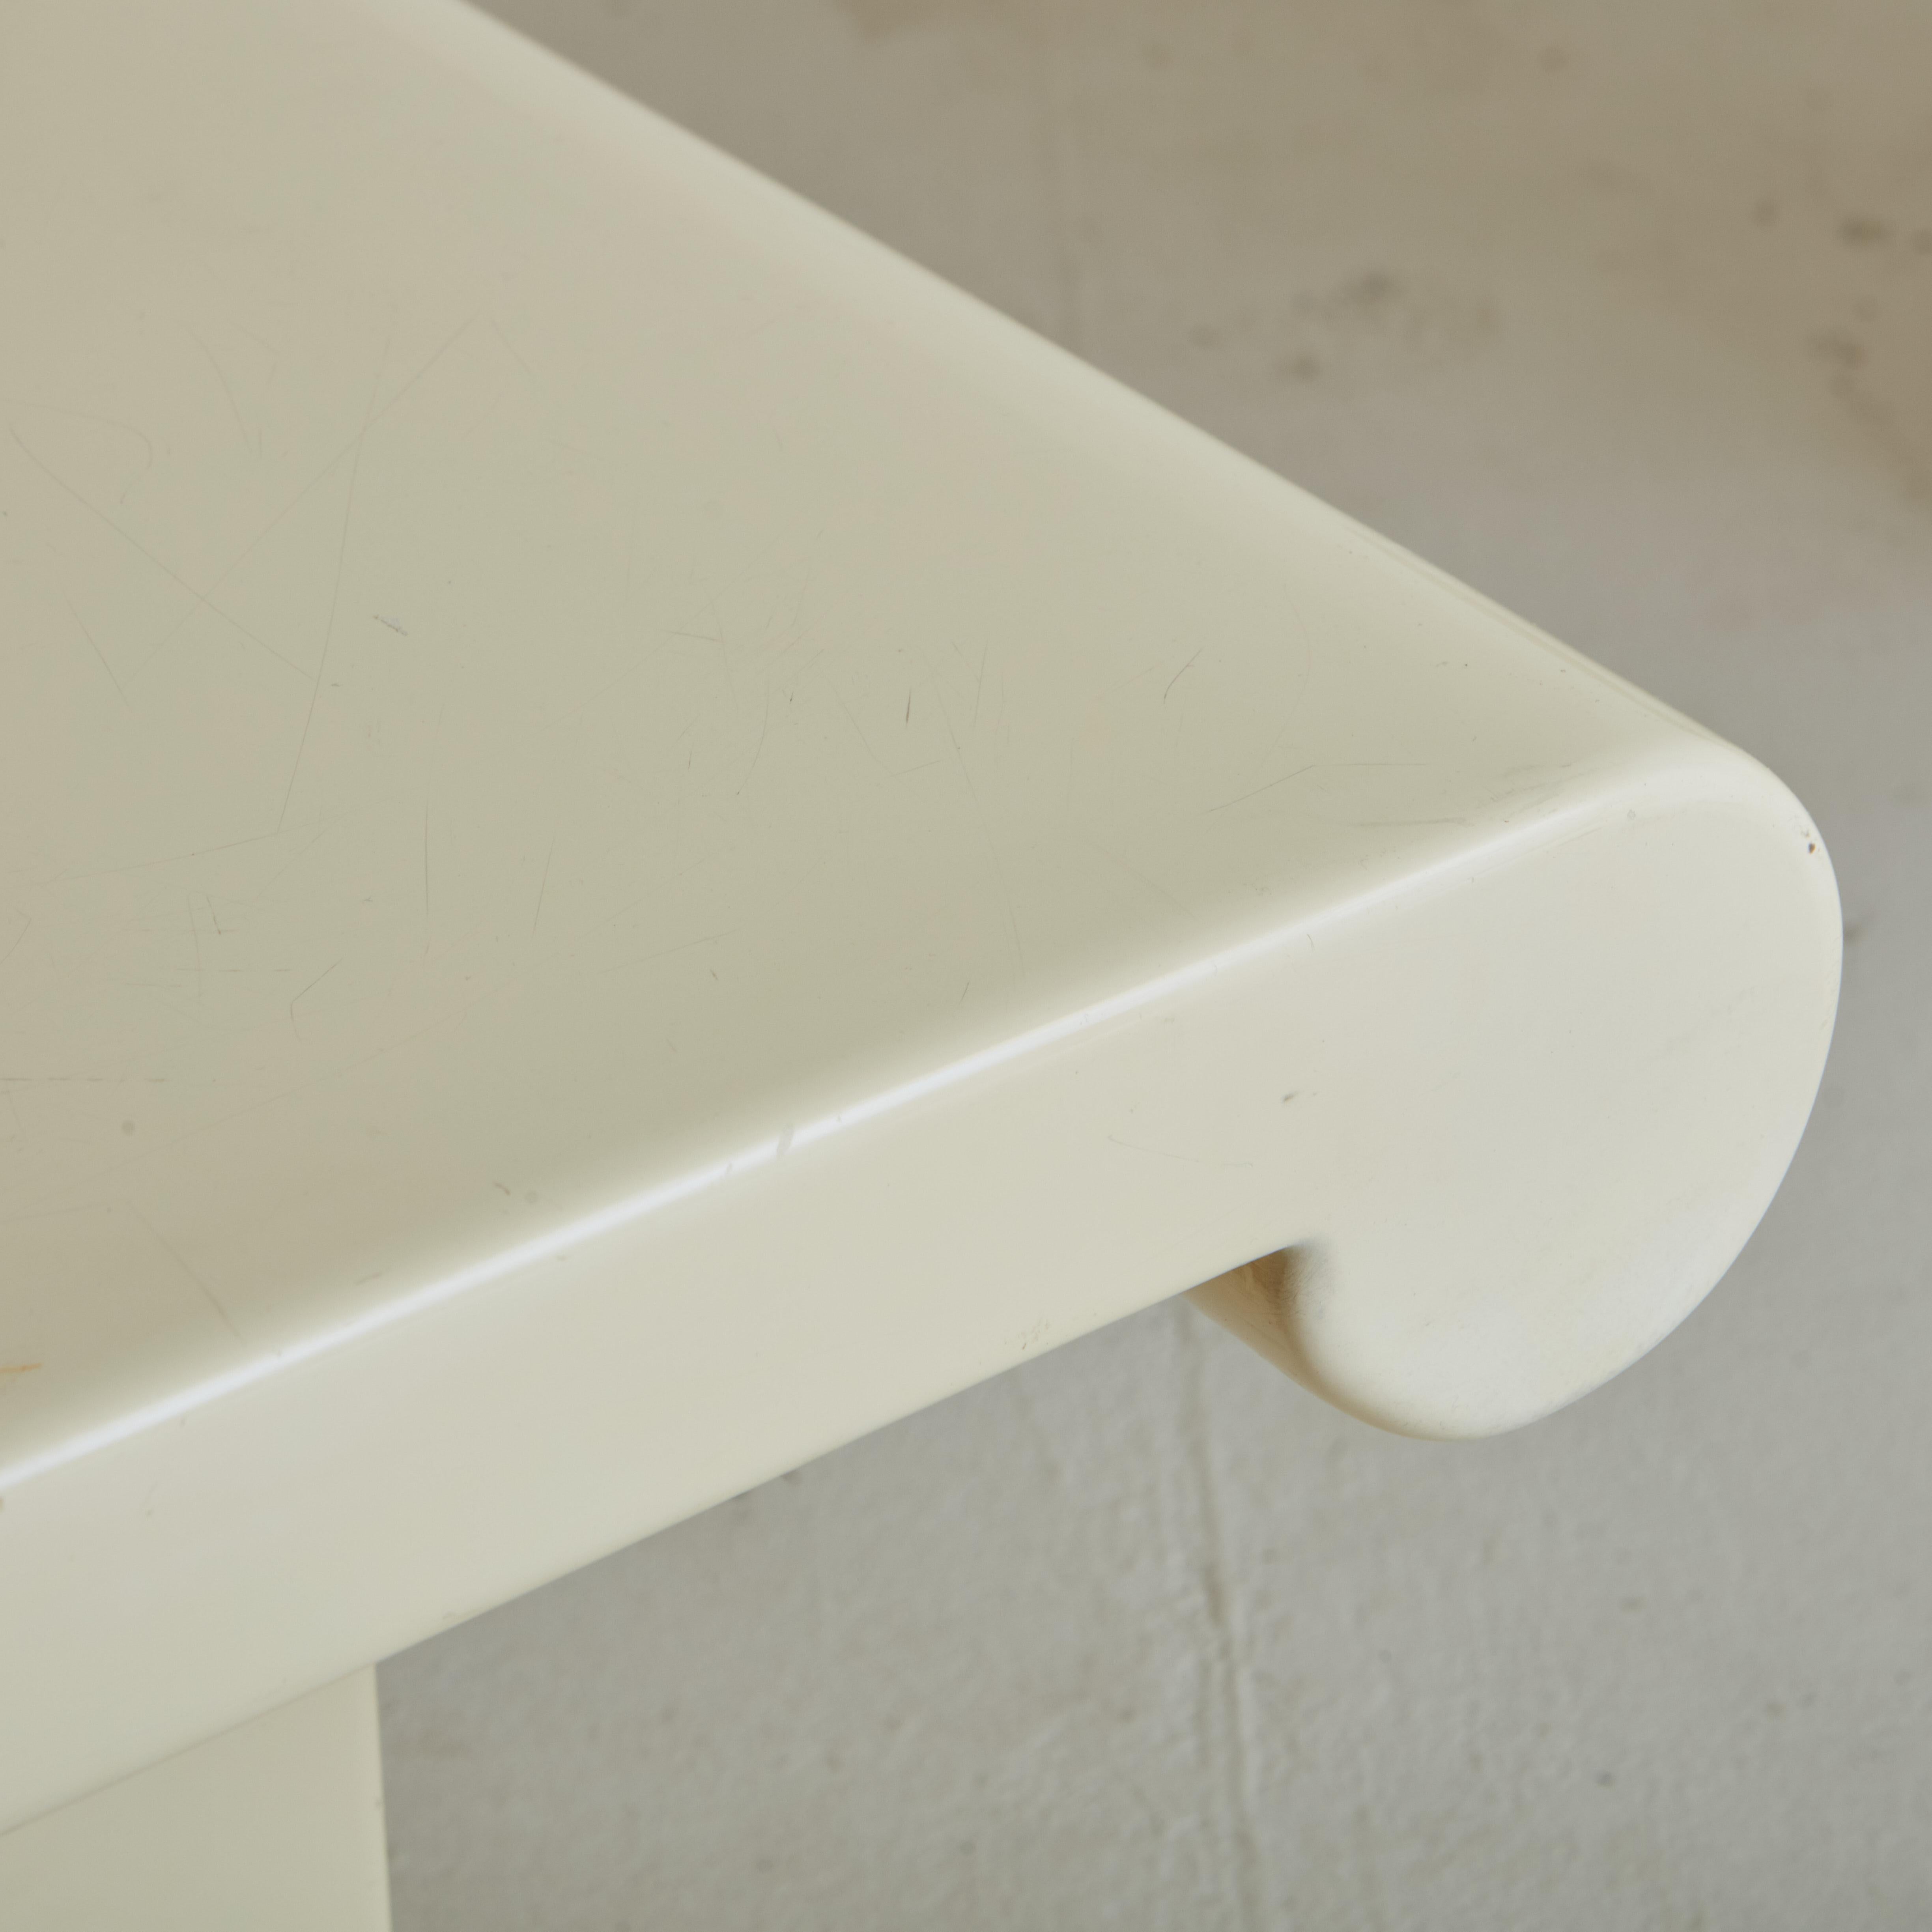 Pair of  white lacquered side table by Marzio Cecchi for Studio Most. The two identical pieces inspired by Greek doric columns are reminescent of Post-Modernism, an architectural, furniture and product design mid-century movement that took